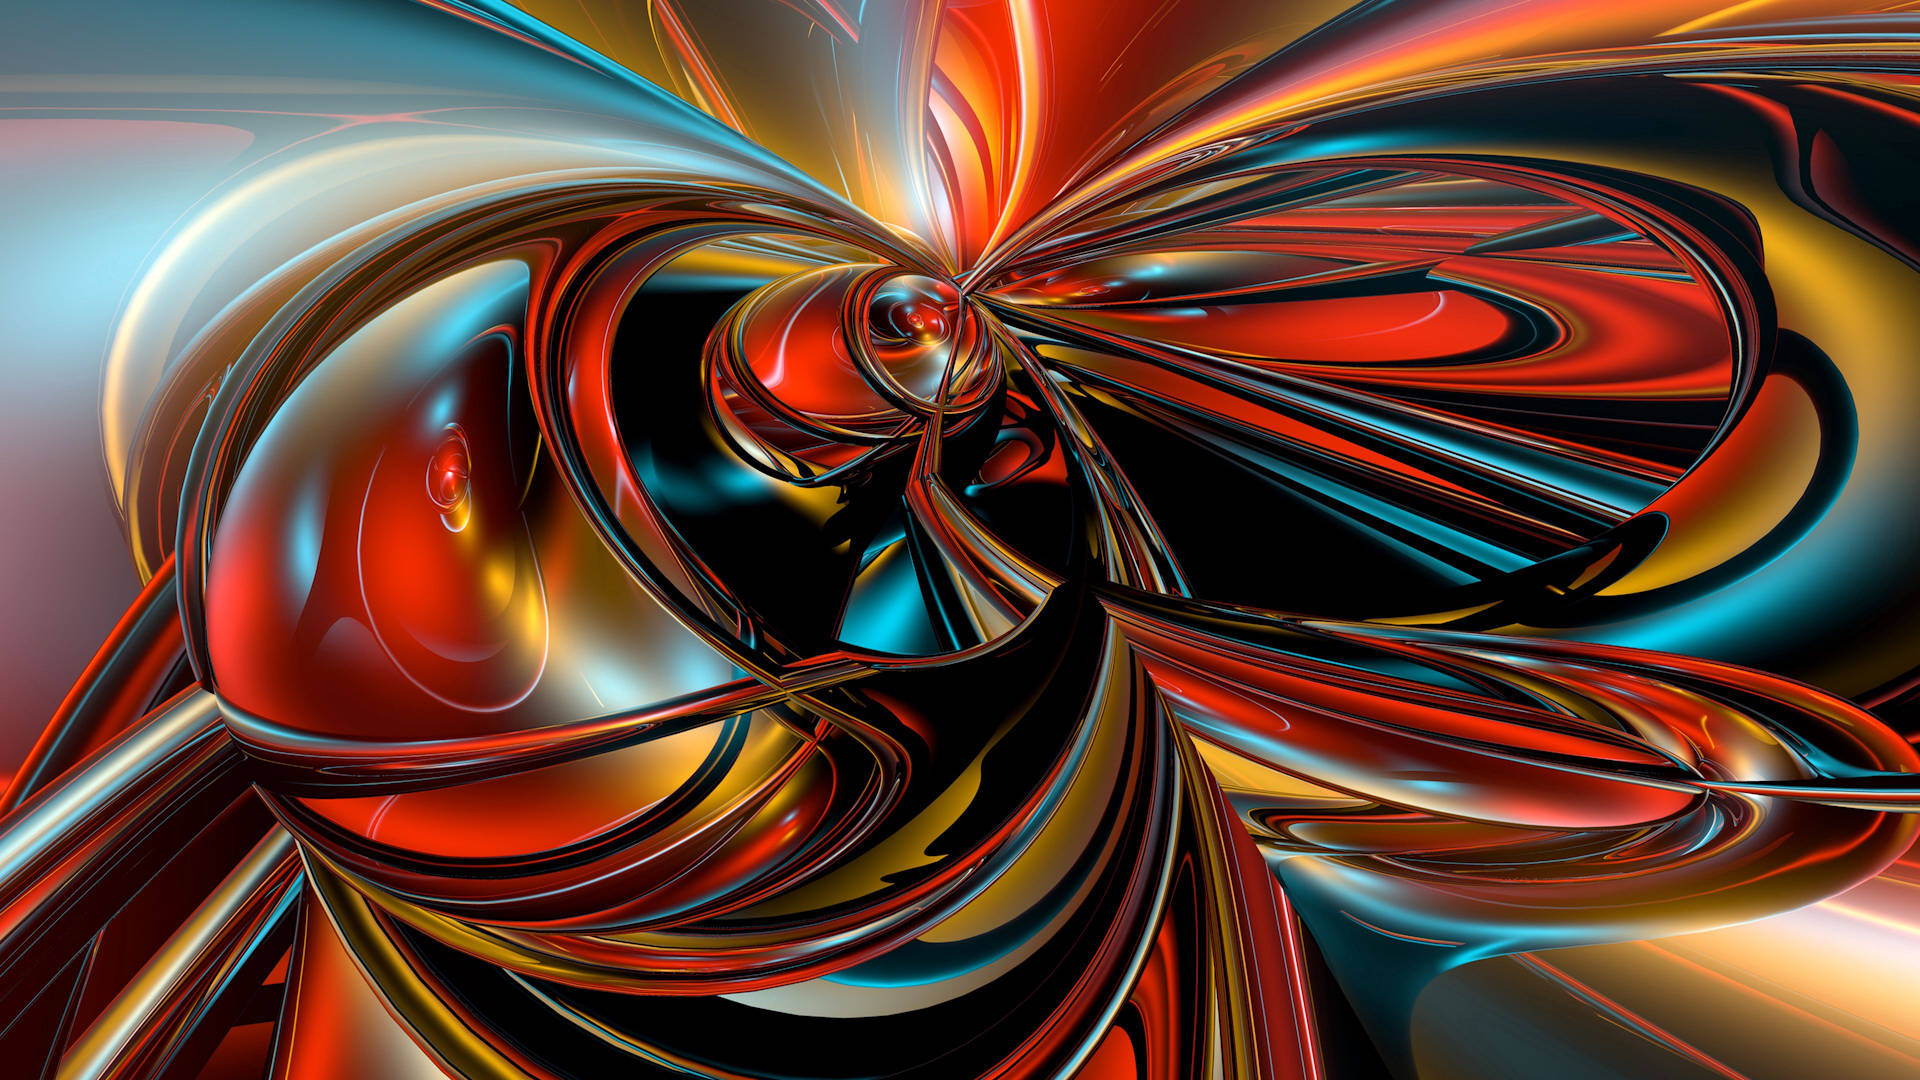 3D colorful fractal abstract artwork wallpaper 